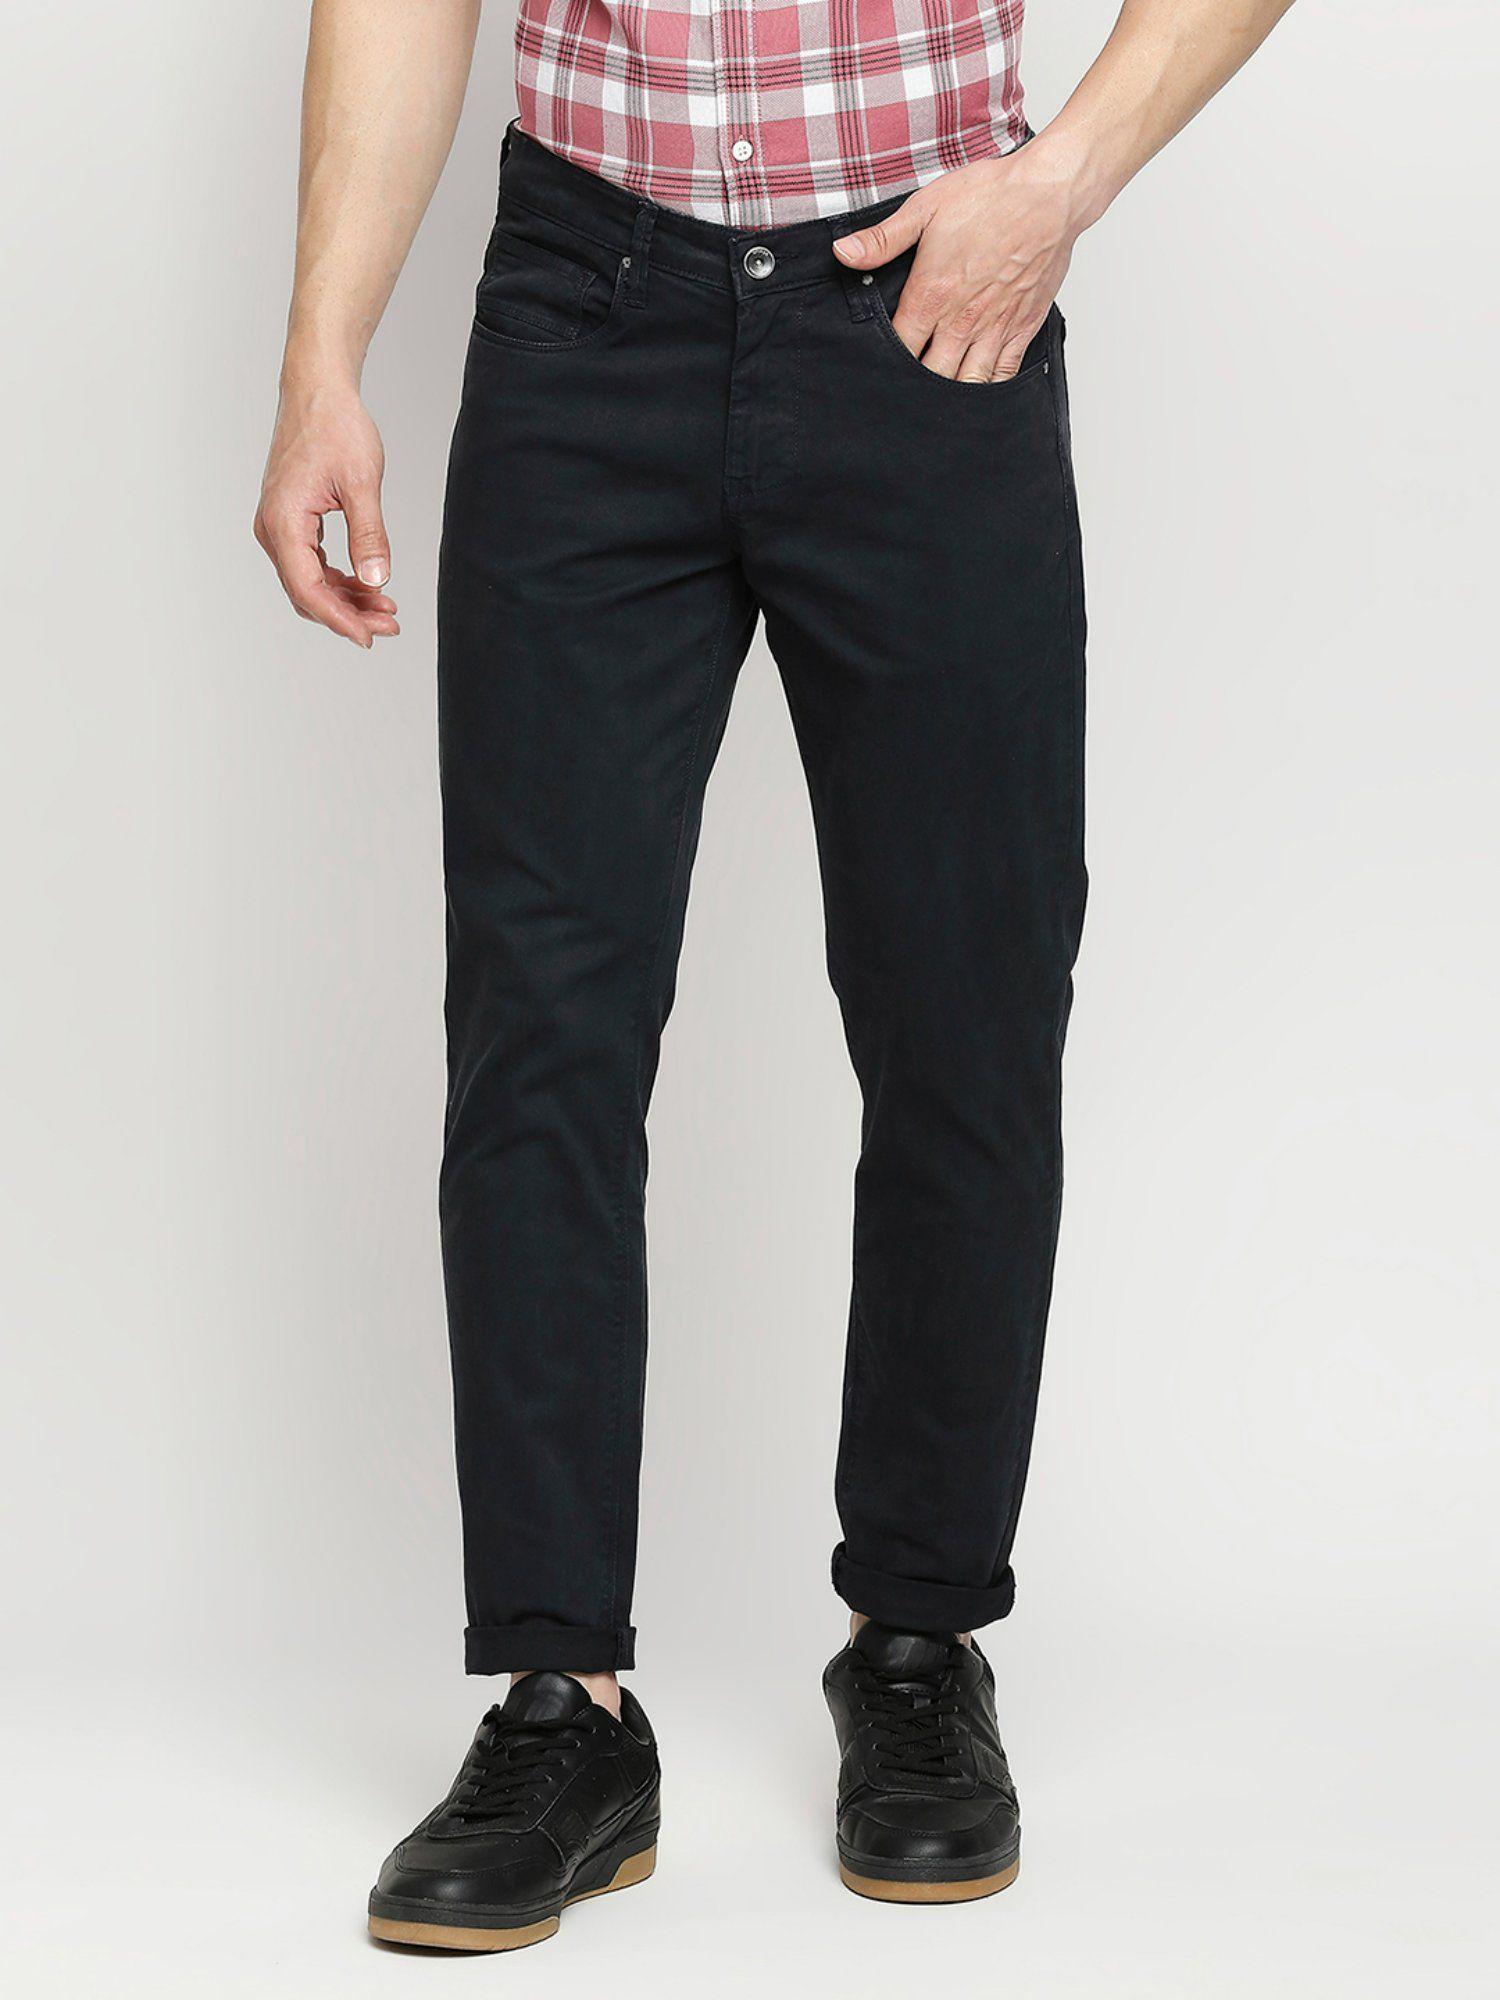 charcoal grey cotton slim fit tapered length trousers for men